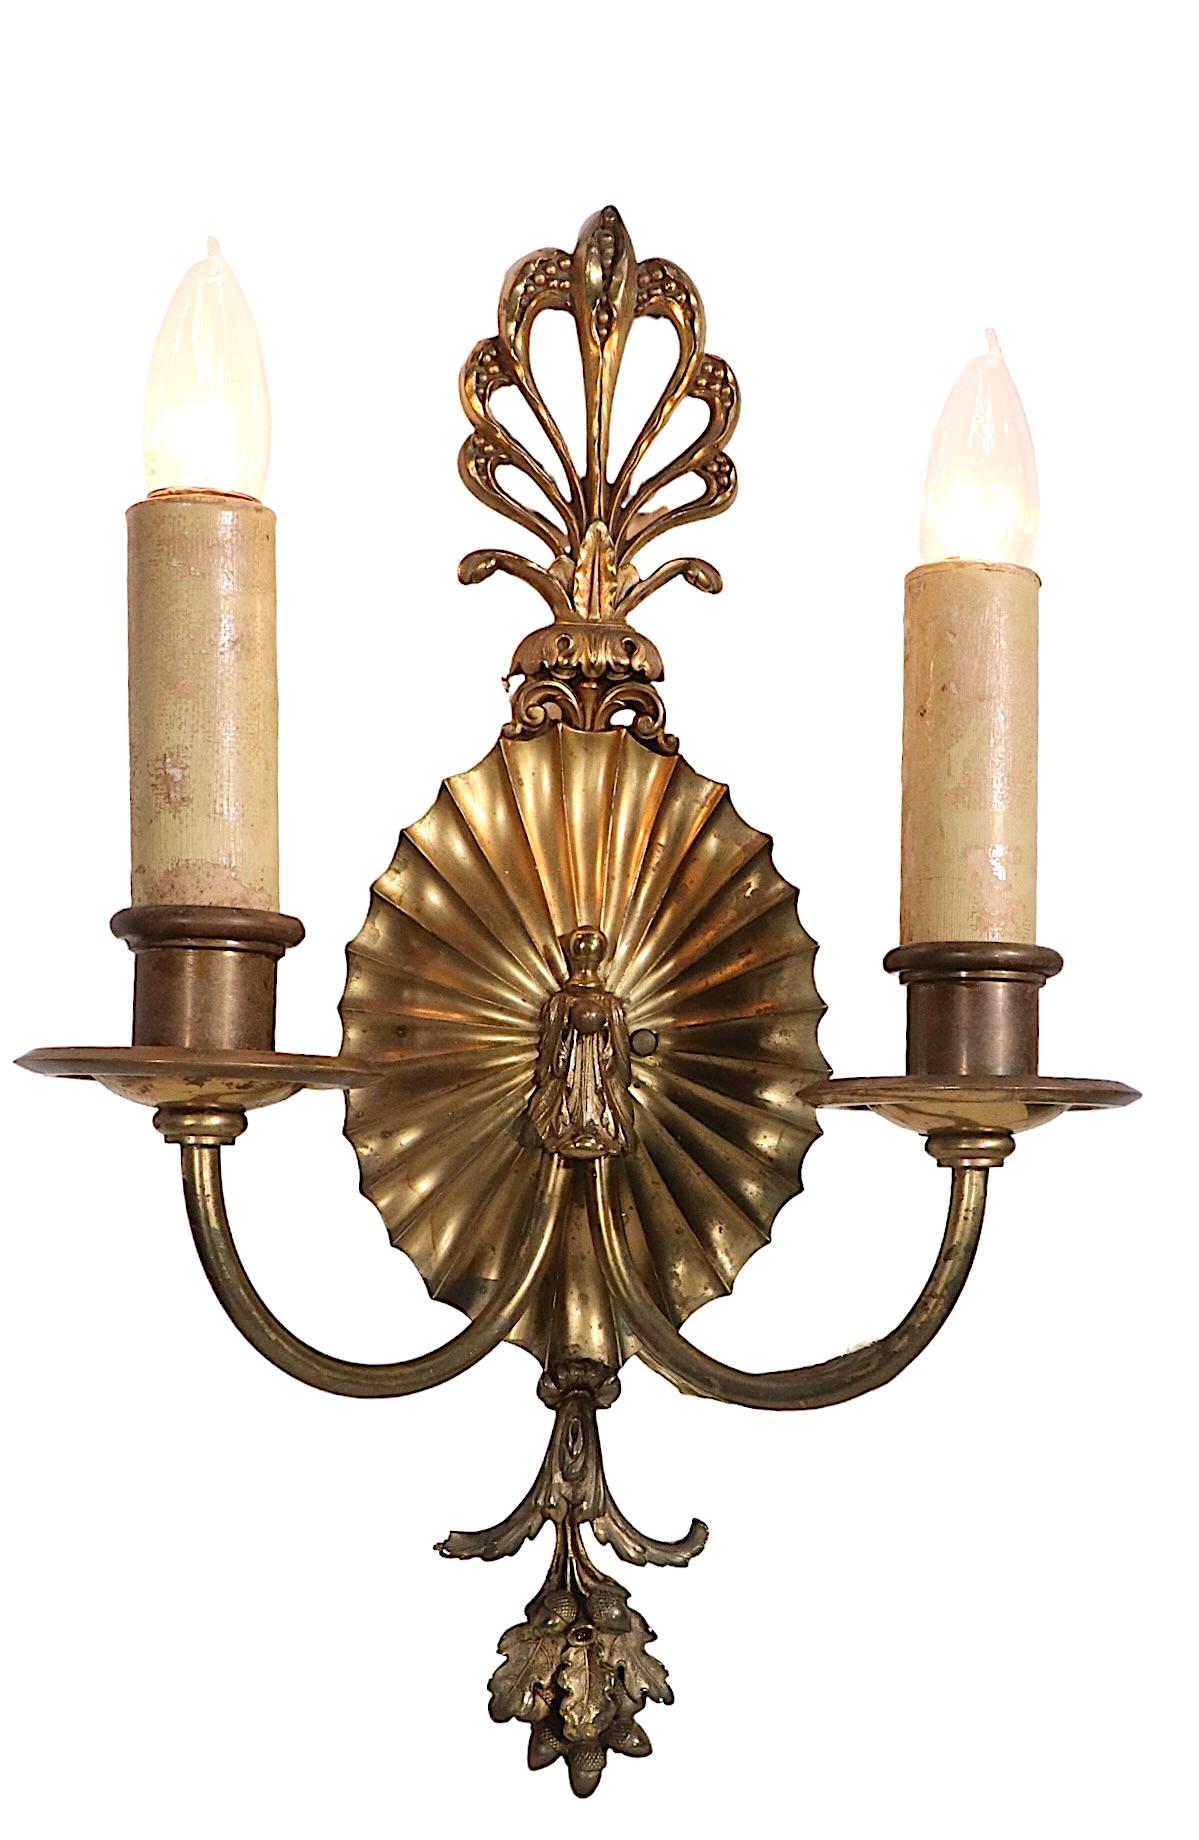 American Pr. Classical Brass Wall Sconces by Caldwell C 1900/ 1920’s